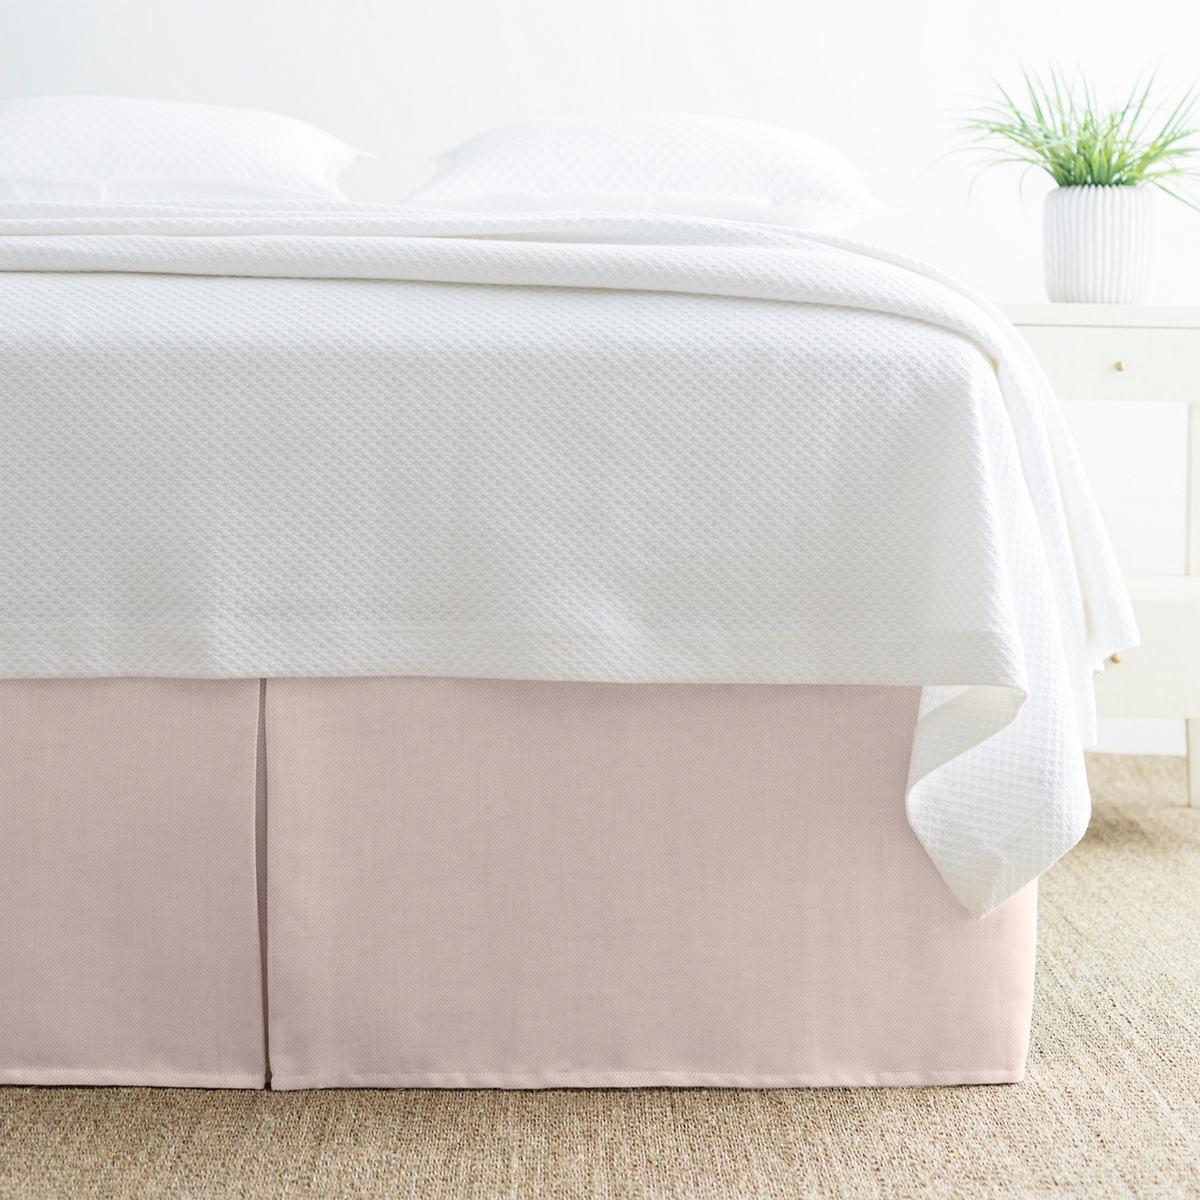 Brussels Slipper Pink Bed Skirt The, Extra Long Queen Bed Skirt